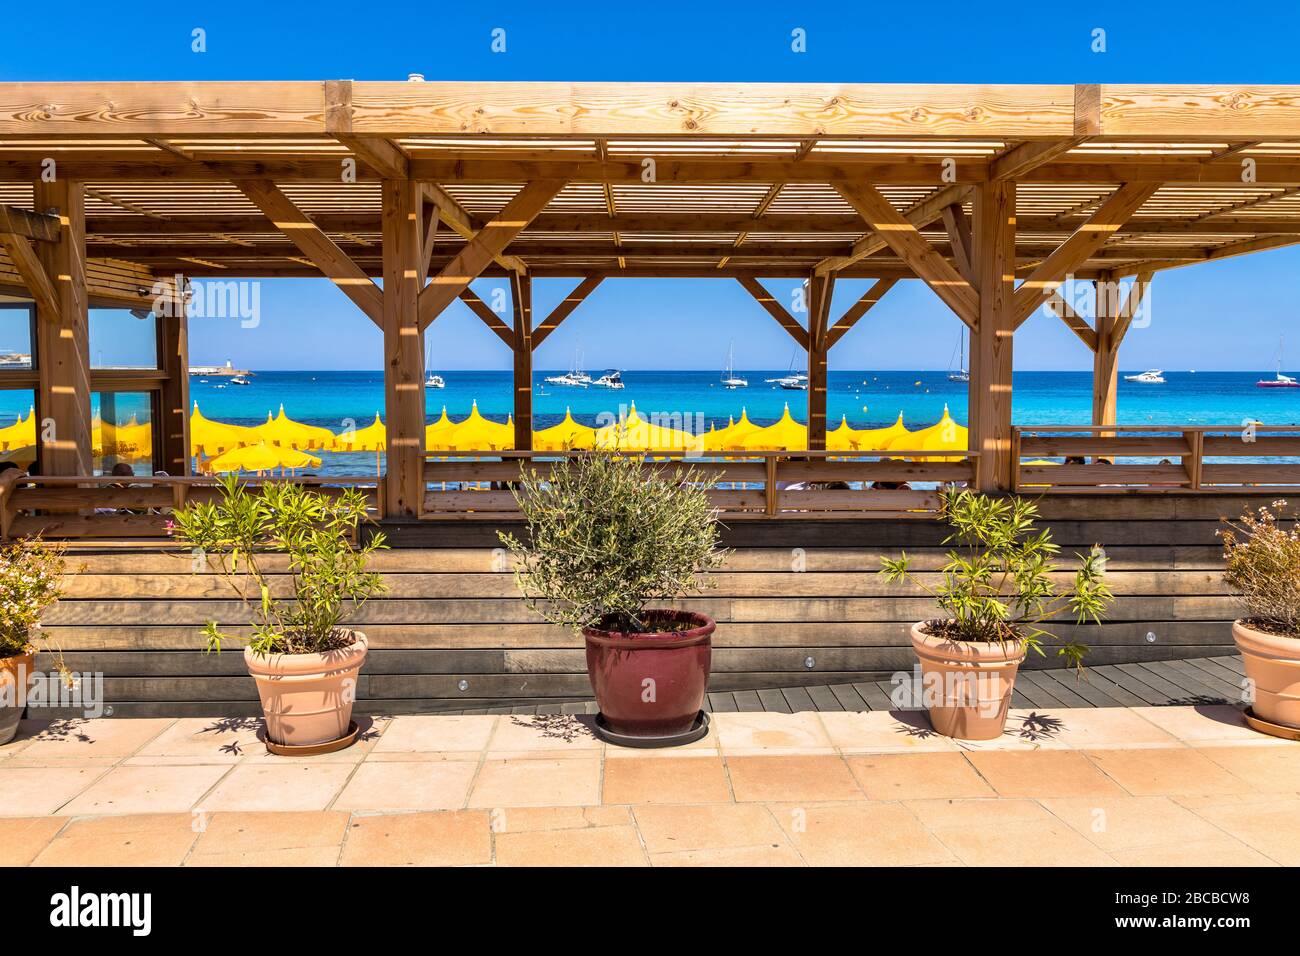 Beach restaurant with pergola and green plants for shady conditions on Corsica Boulevard, France. Stock Photo